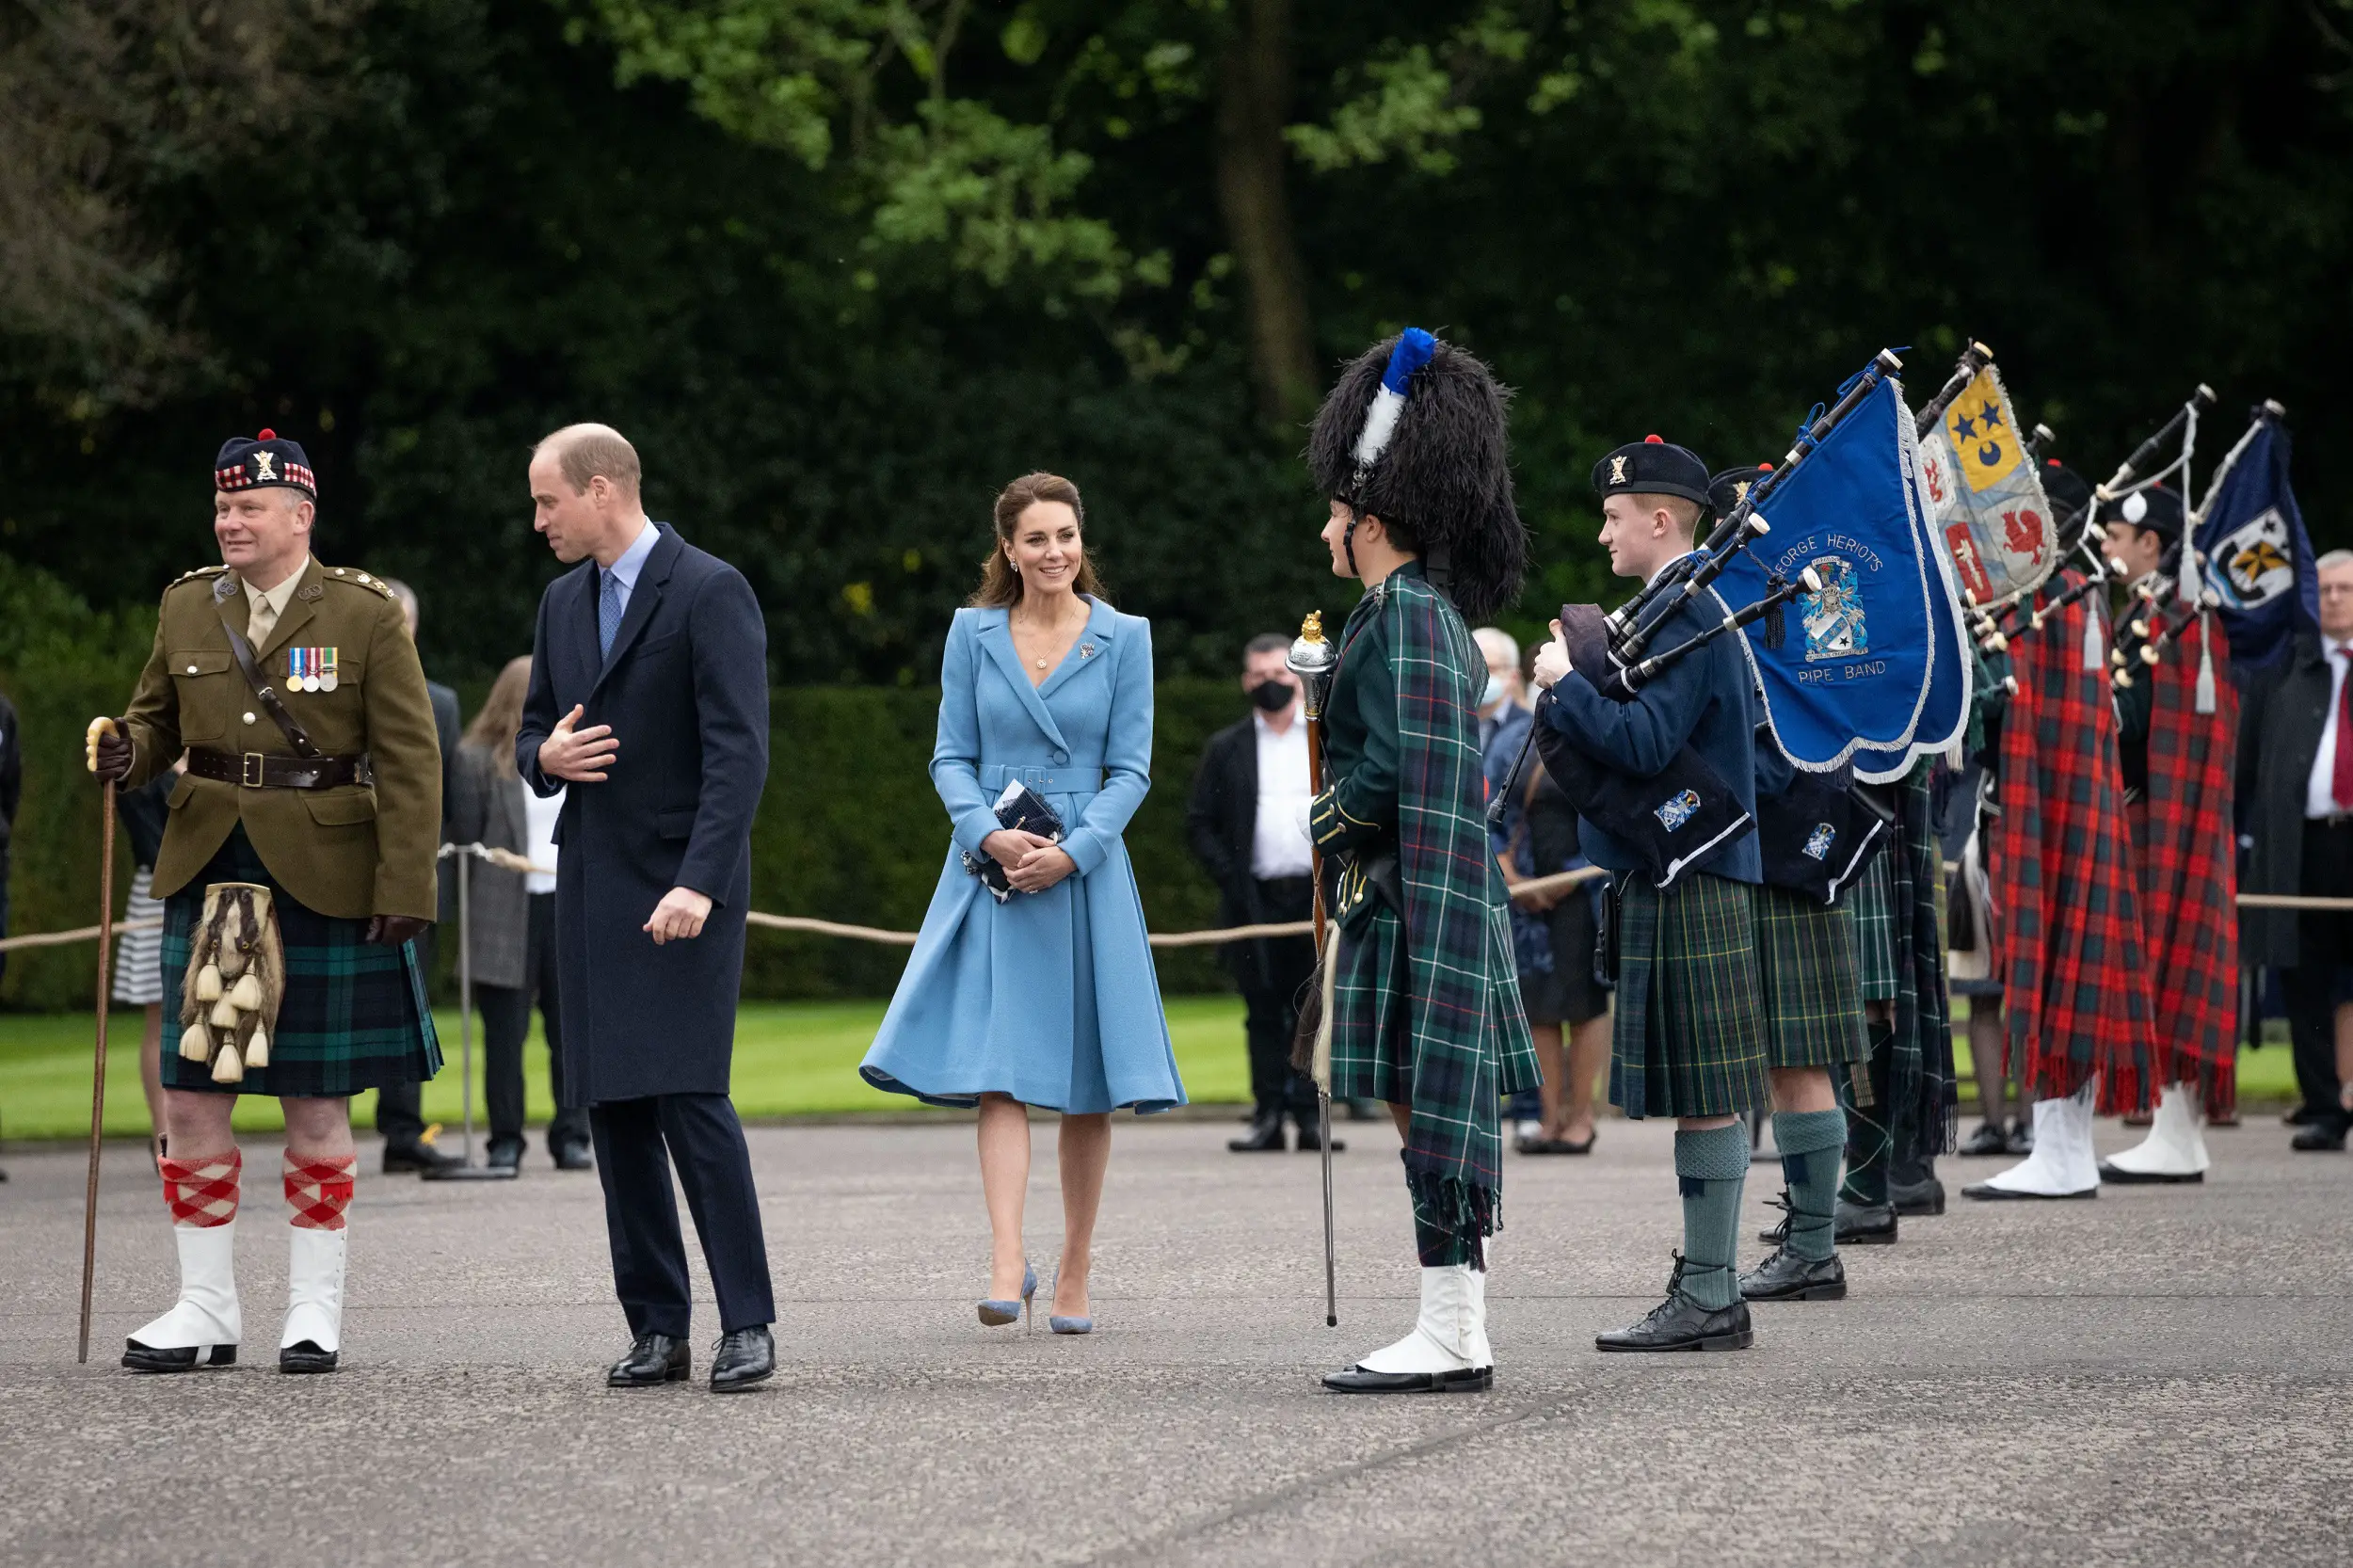 The Earl and Countess of Strathearn's last engagement in Scotland were Beating the Retreat ceremony at the Palace of Holyrood House